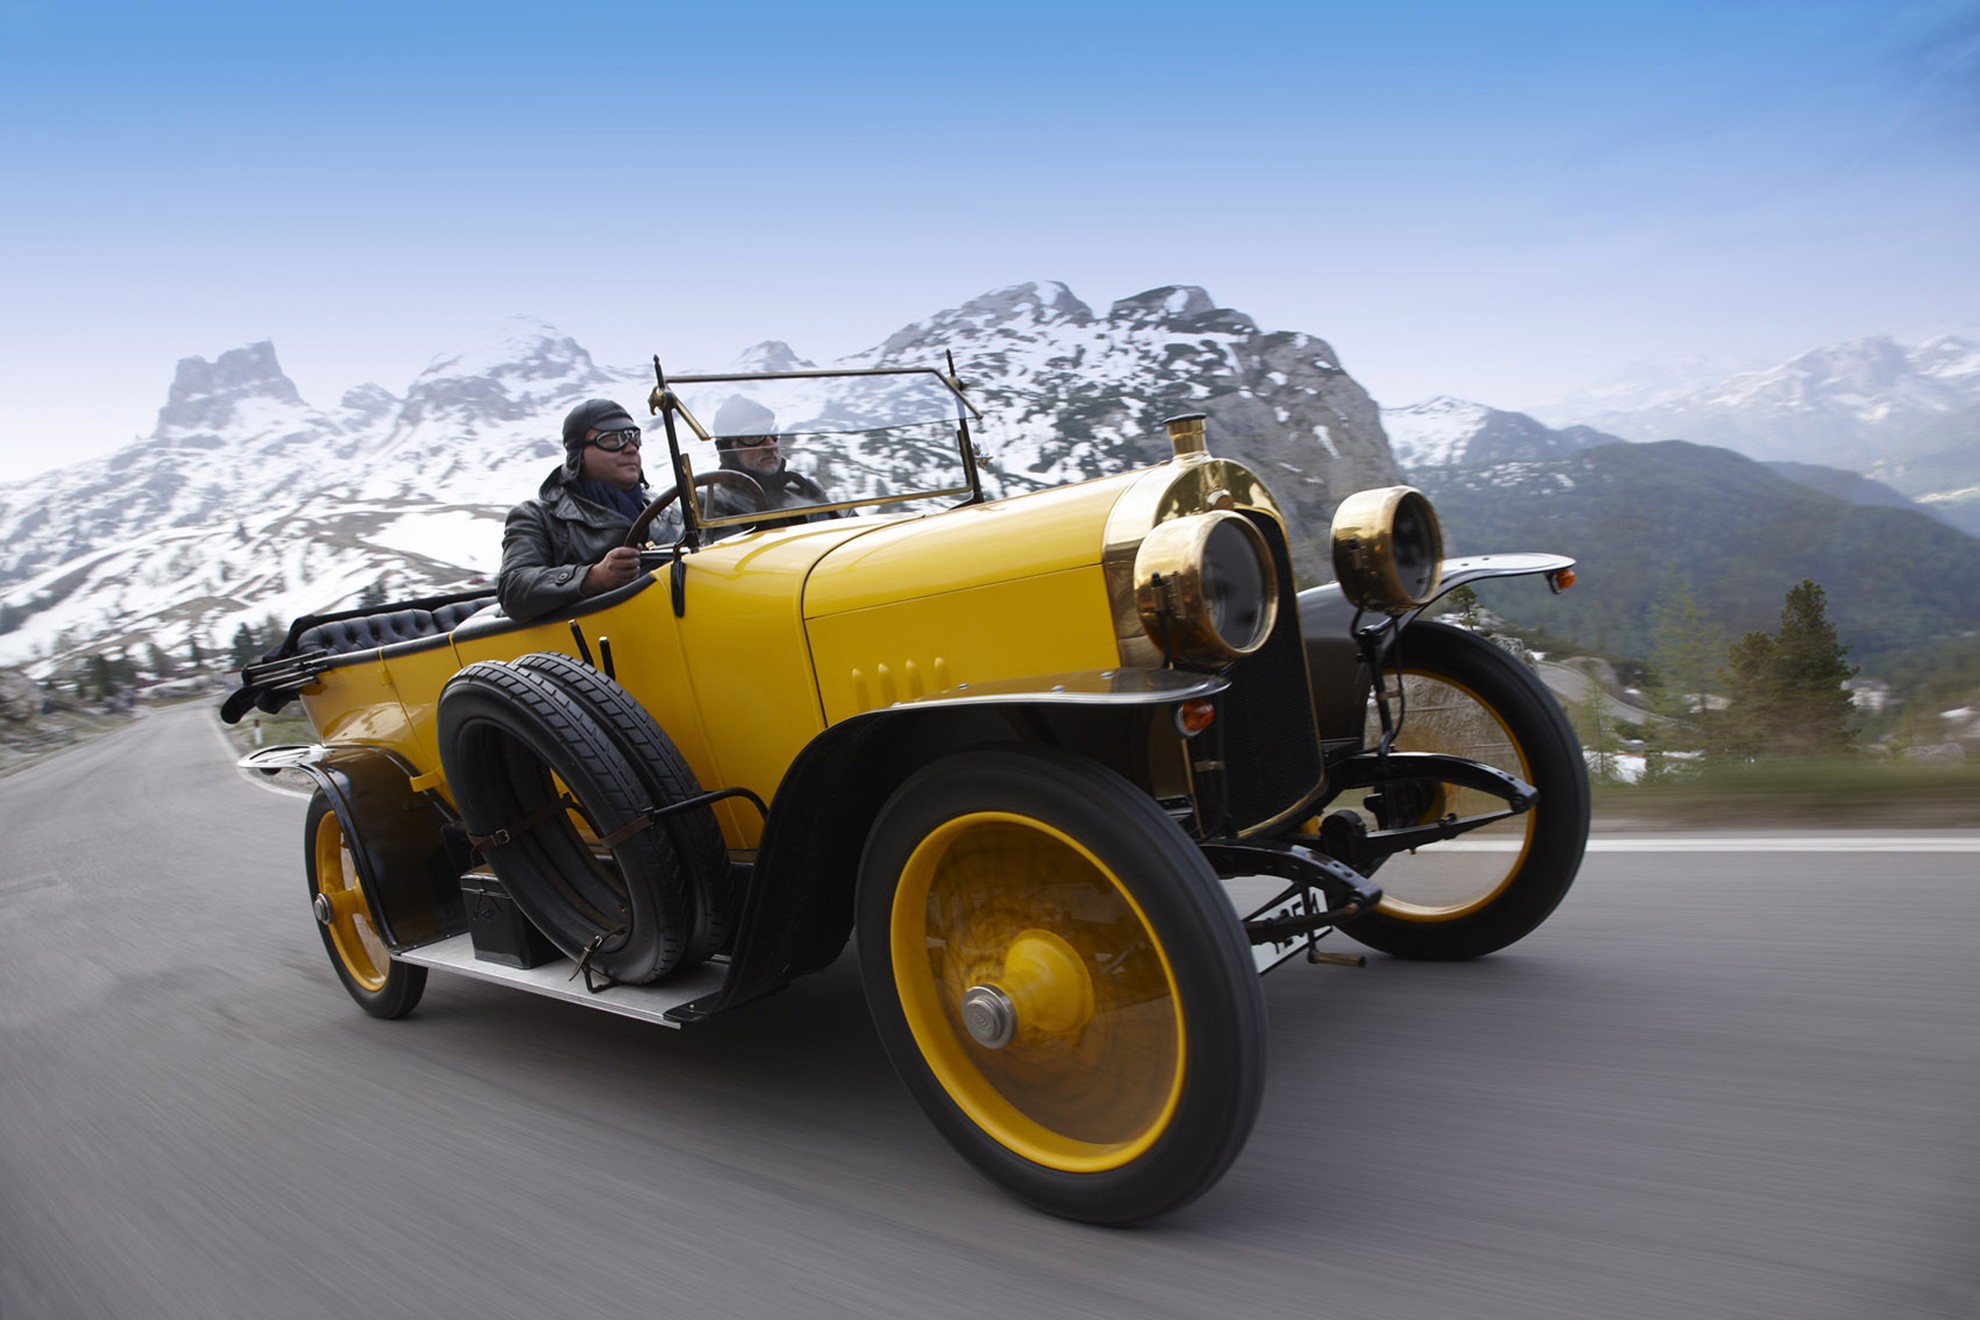 Audi shows real champions at the Techno Classica